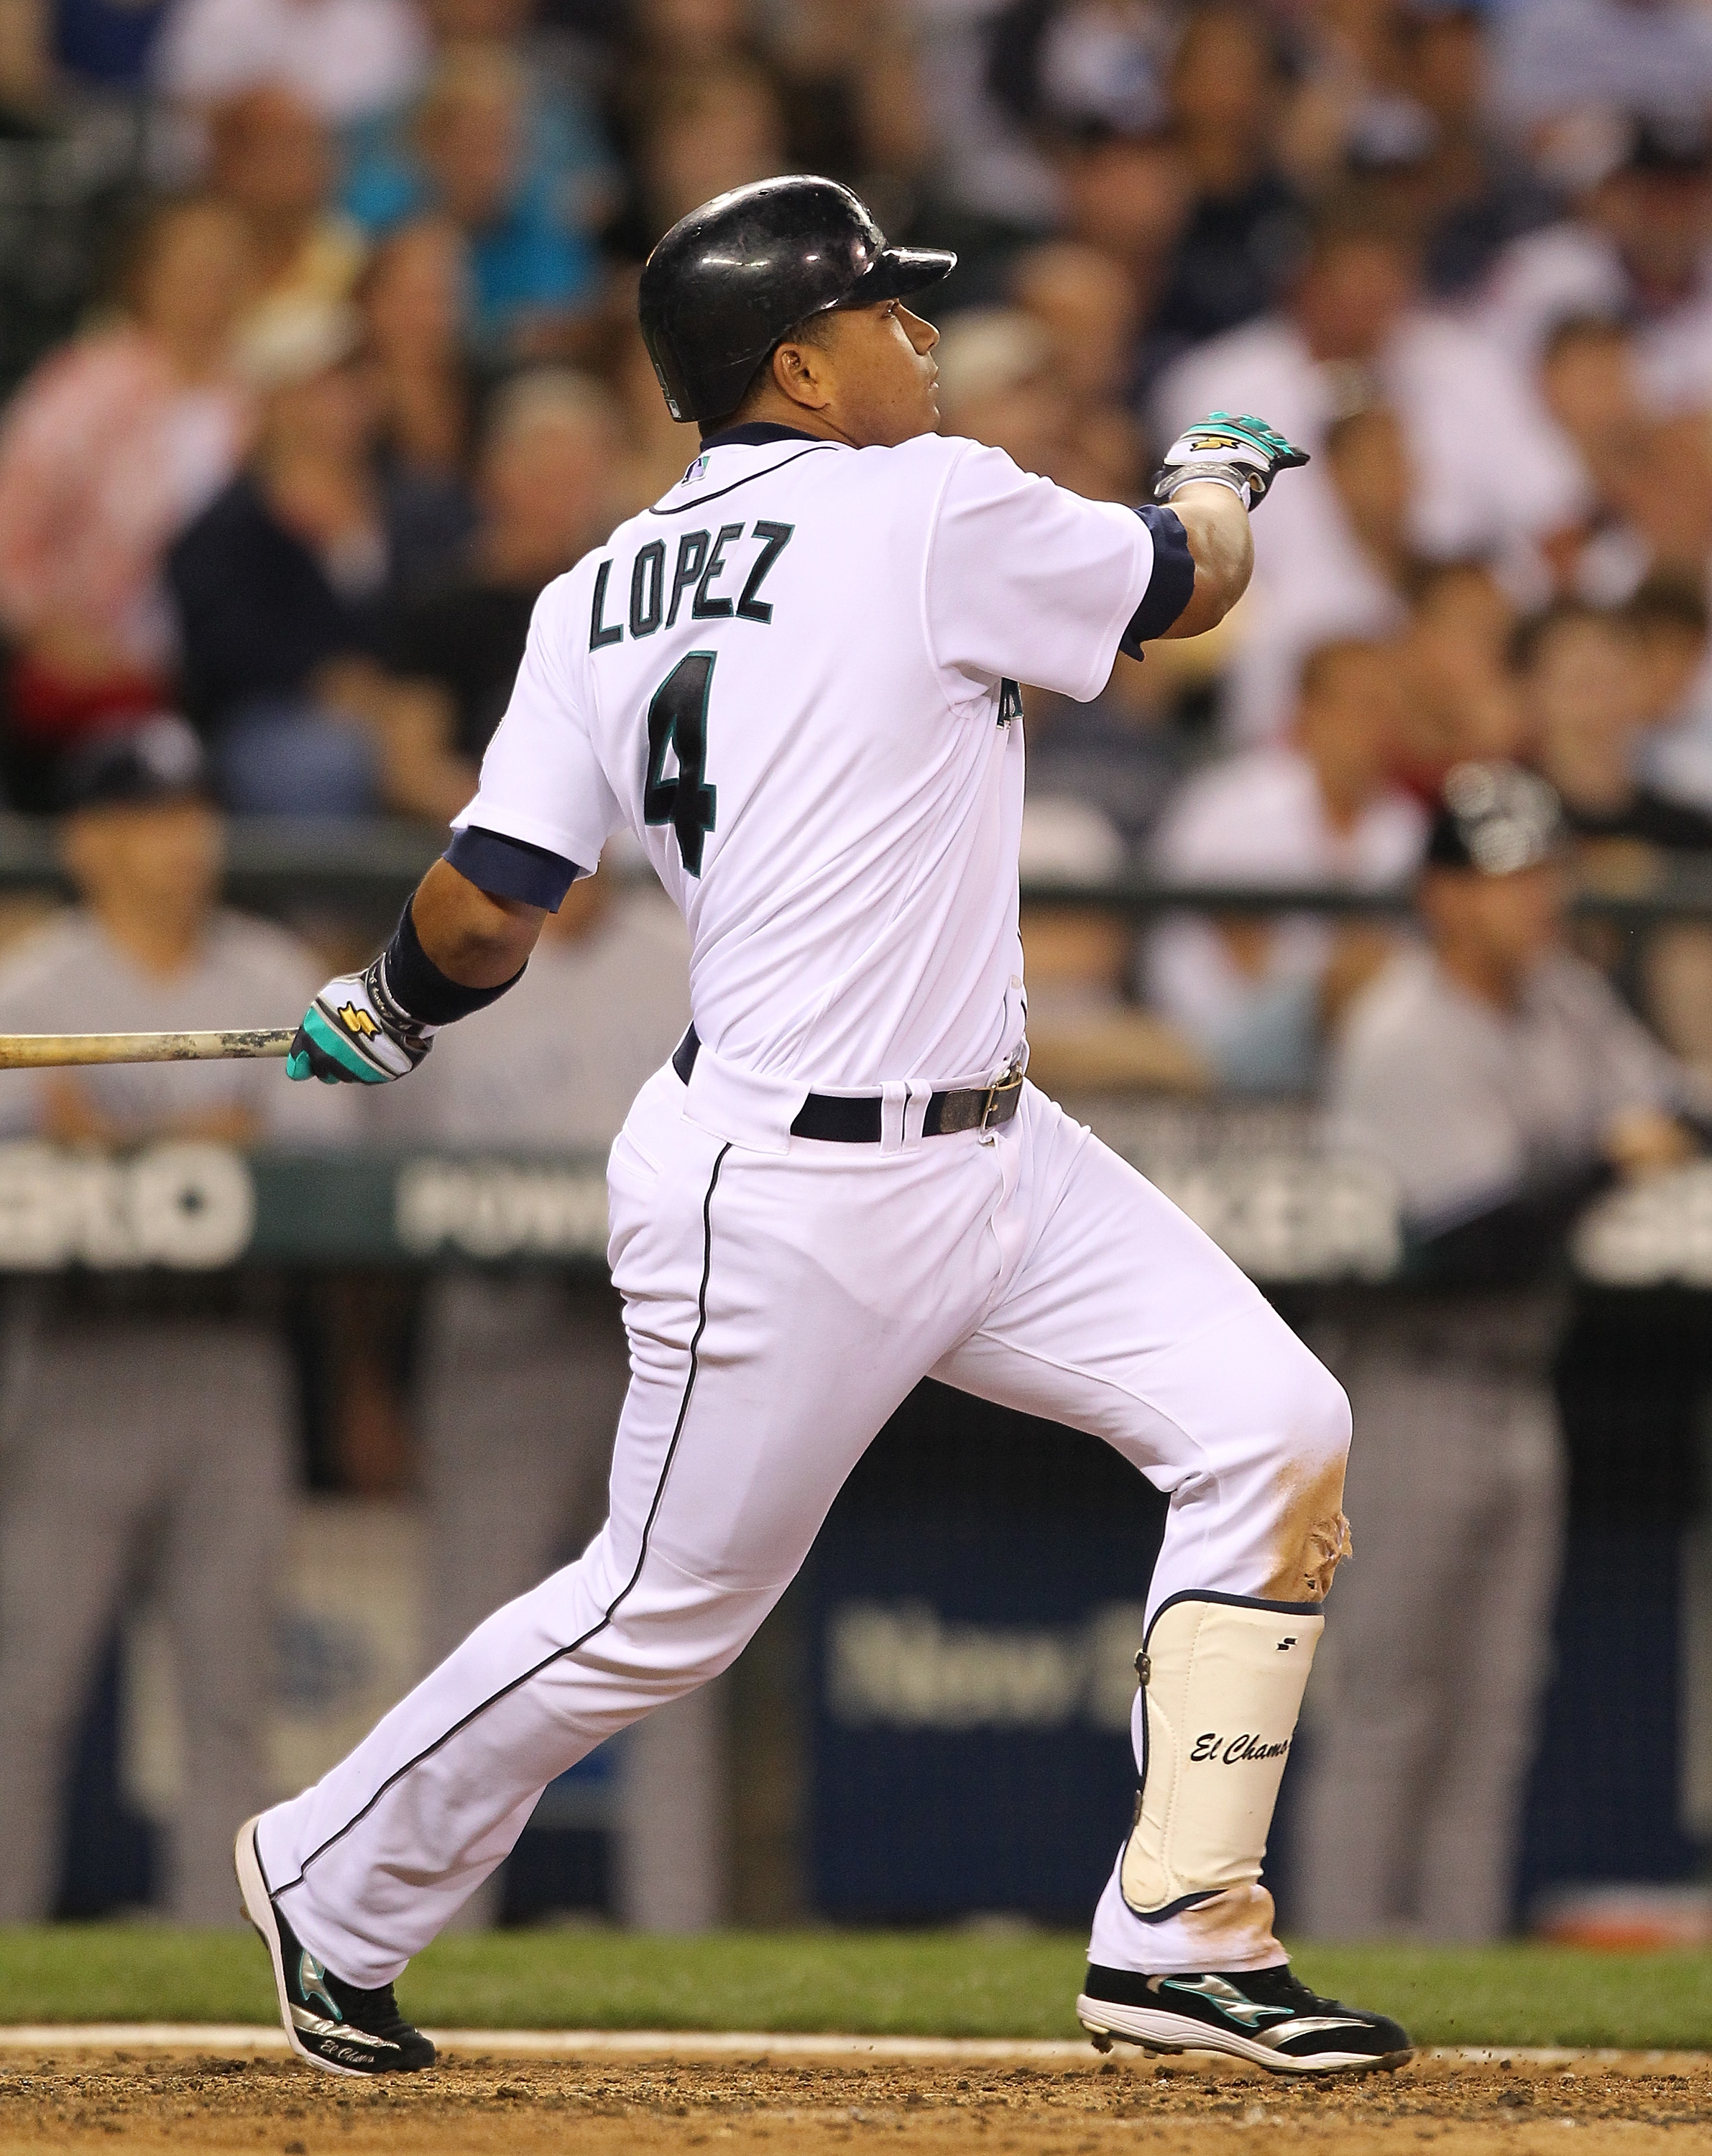 SEATTLE - JULY 10:  Jose Lopez #4 of the Seattle Mariners hits a grand slam in the eighth inning against the New York Yankees at Safeco Field on July 10, 2010 in Seattle, Washington. (Photo by Otto Greule Jr/Getty Images)